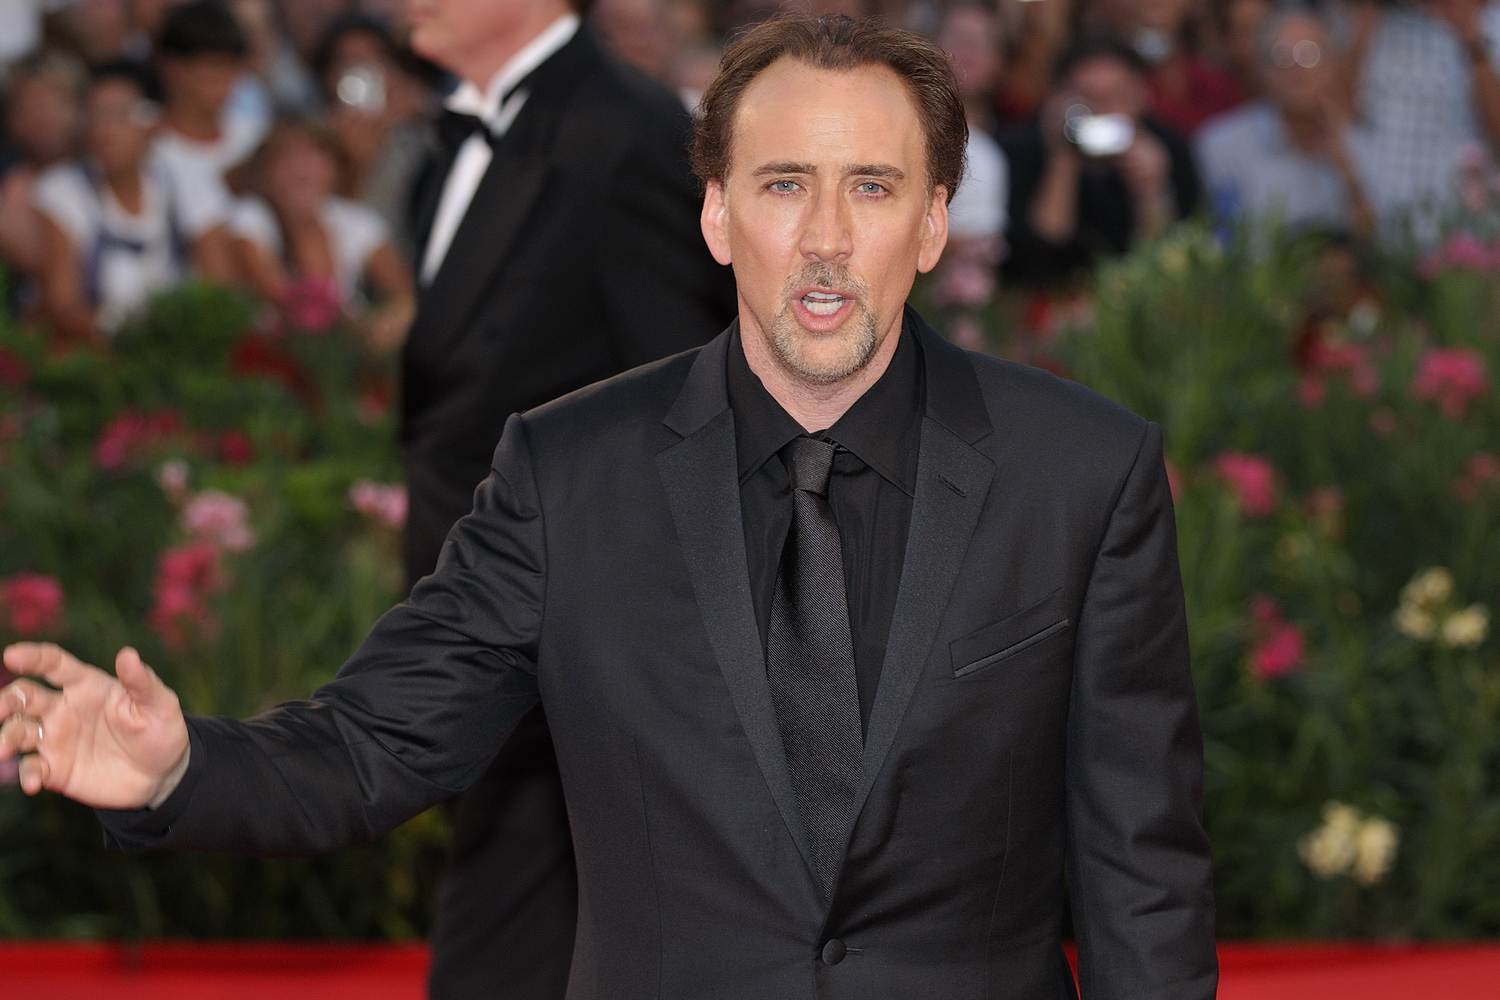 Nicolas Cage stars in new movie about himself, but he's refusing to watch it.